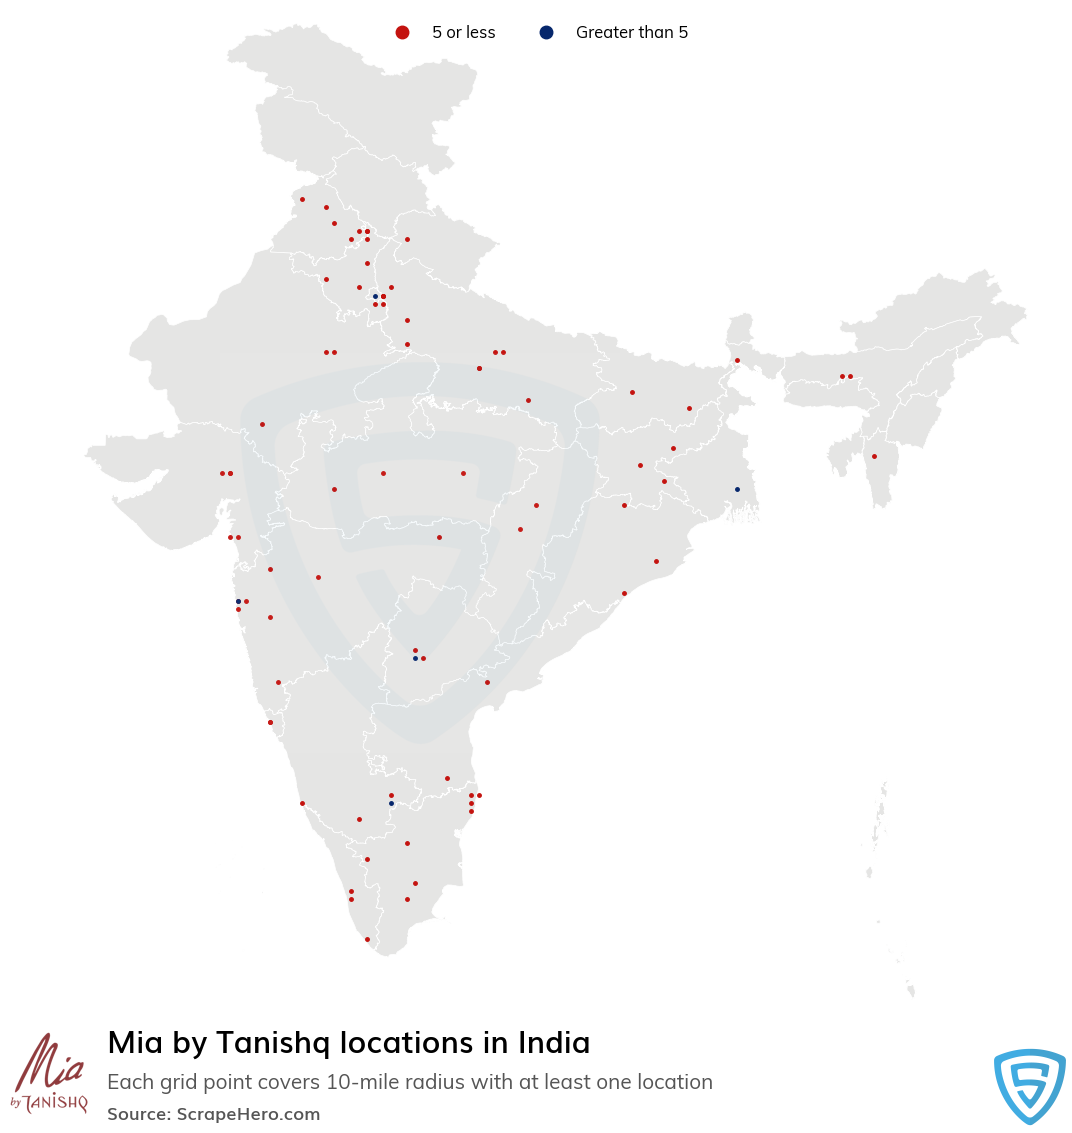 Mia by Tanishq store locations